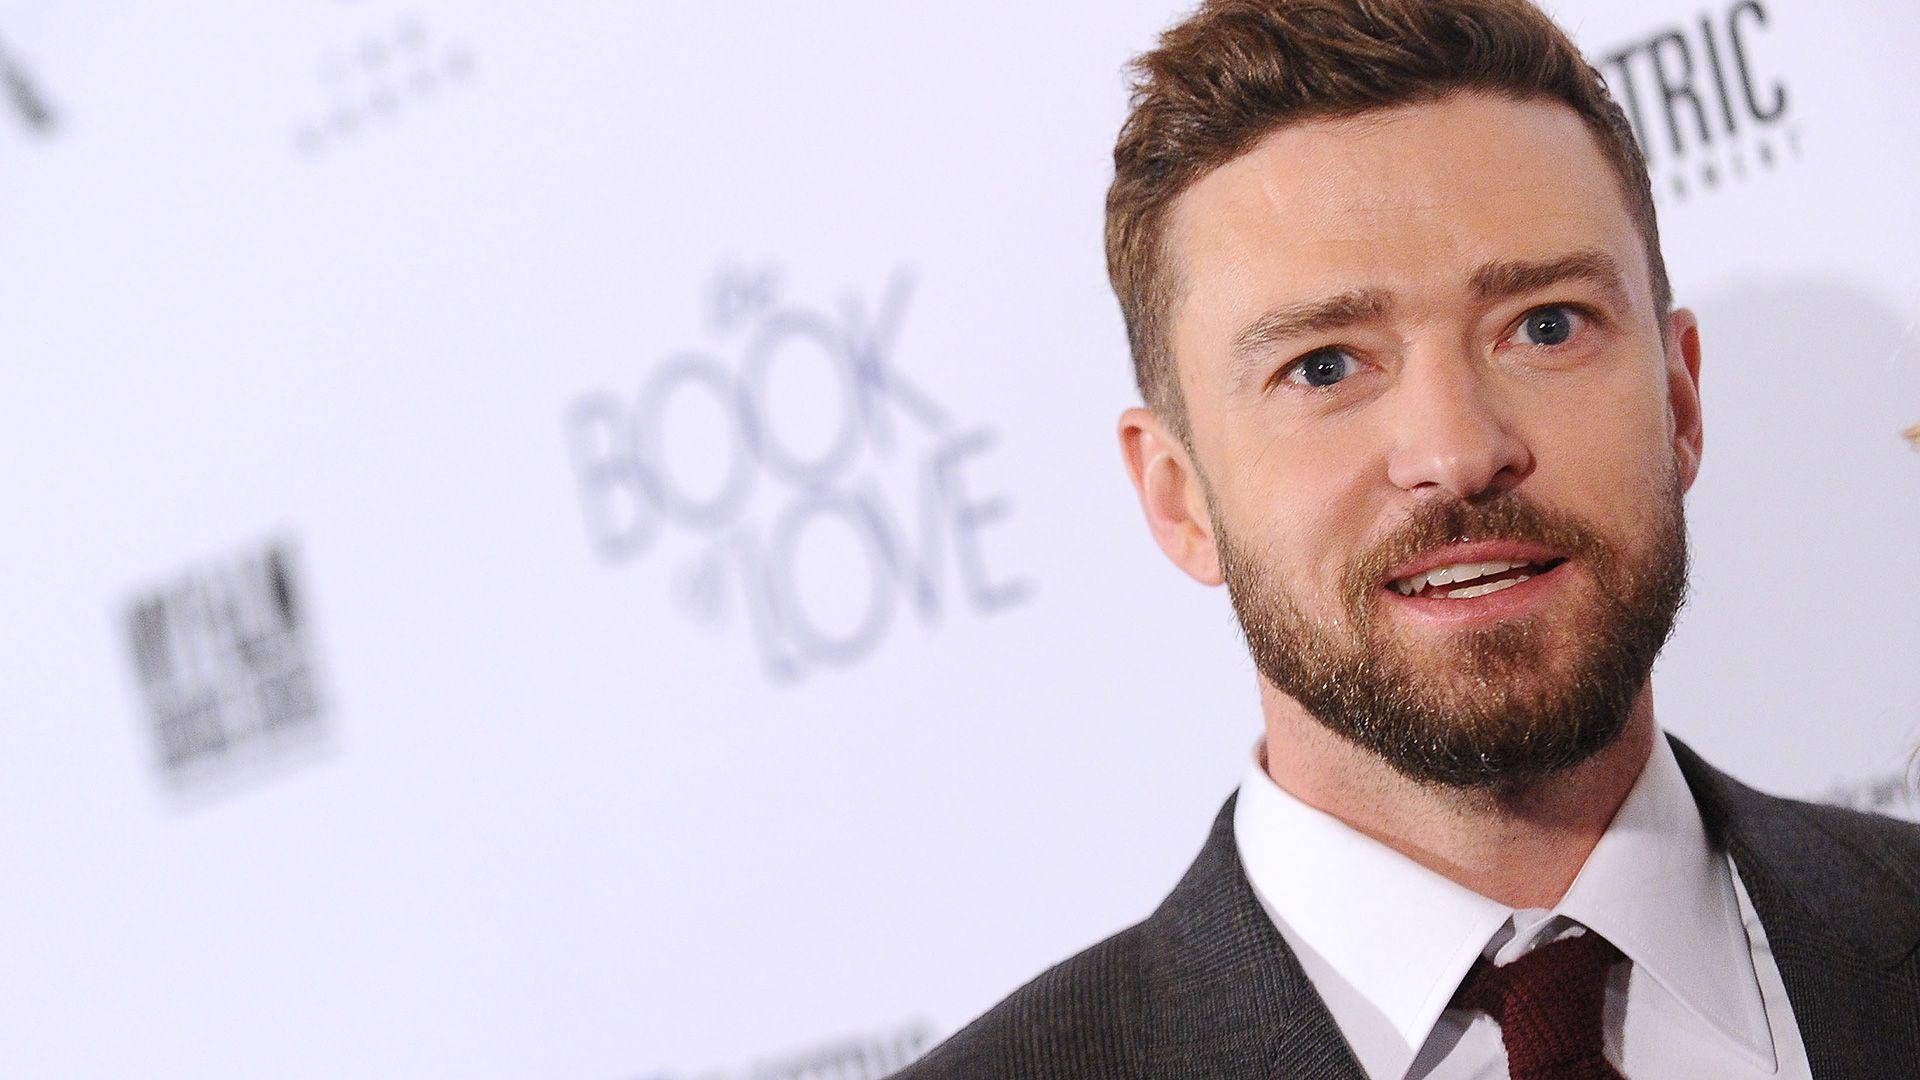 Justin Timberlake, 'Chief Flavor Officer' of Bai, Will Star